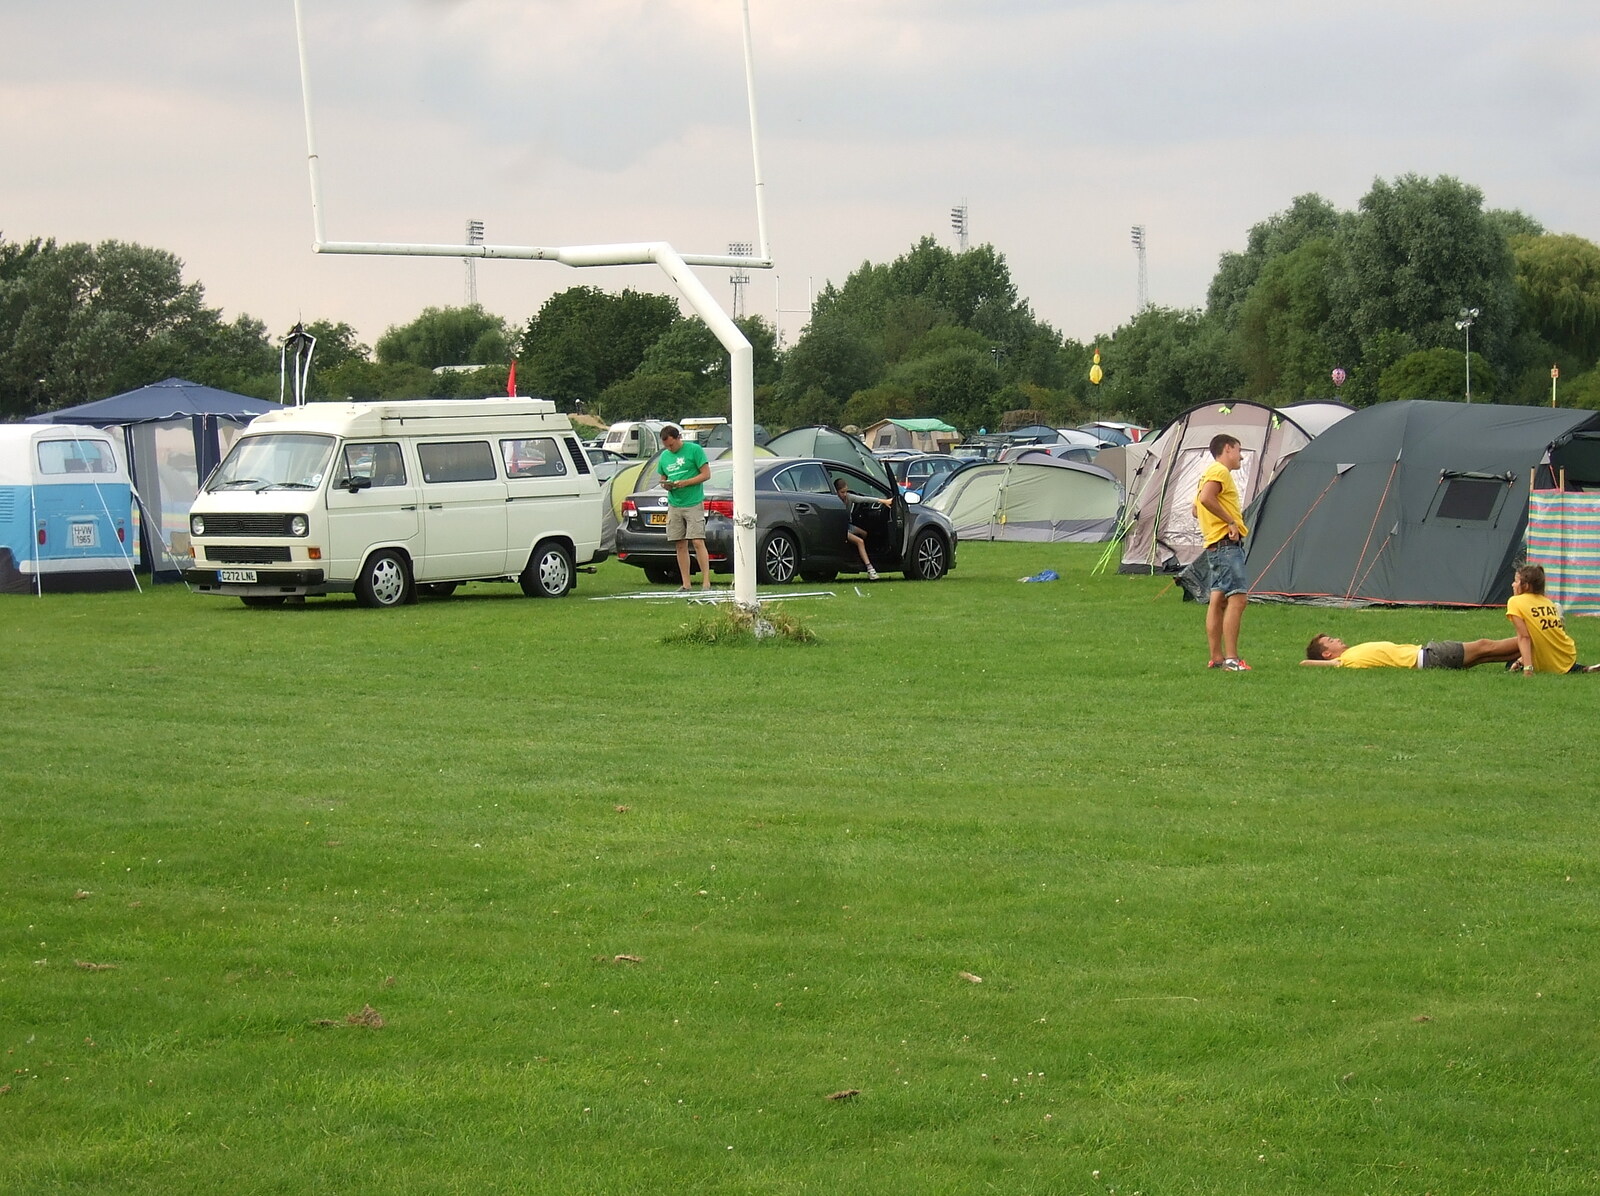 Tent City on Coldham's Common, and another van from The Cambridge Folk Festival, Cherry Hinton, Cambridge - 28th July 2012